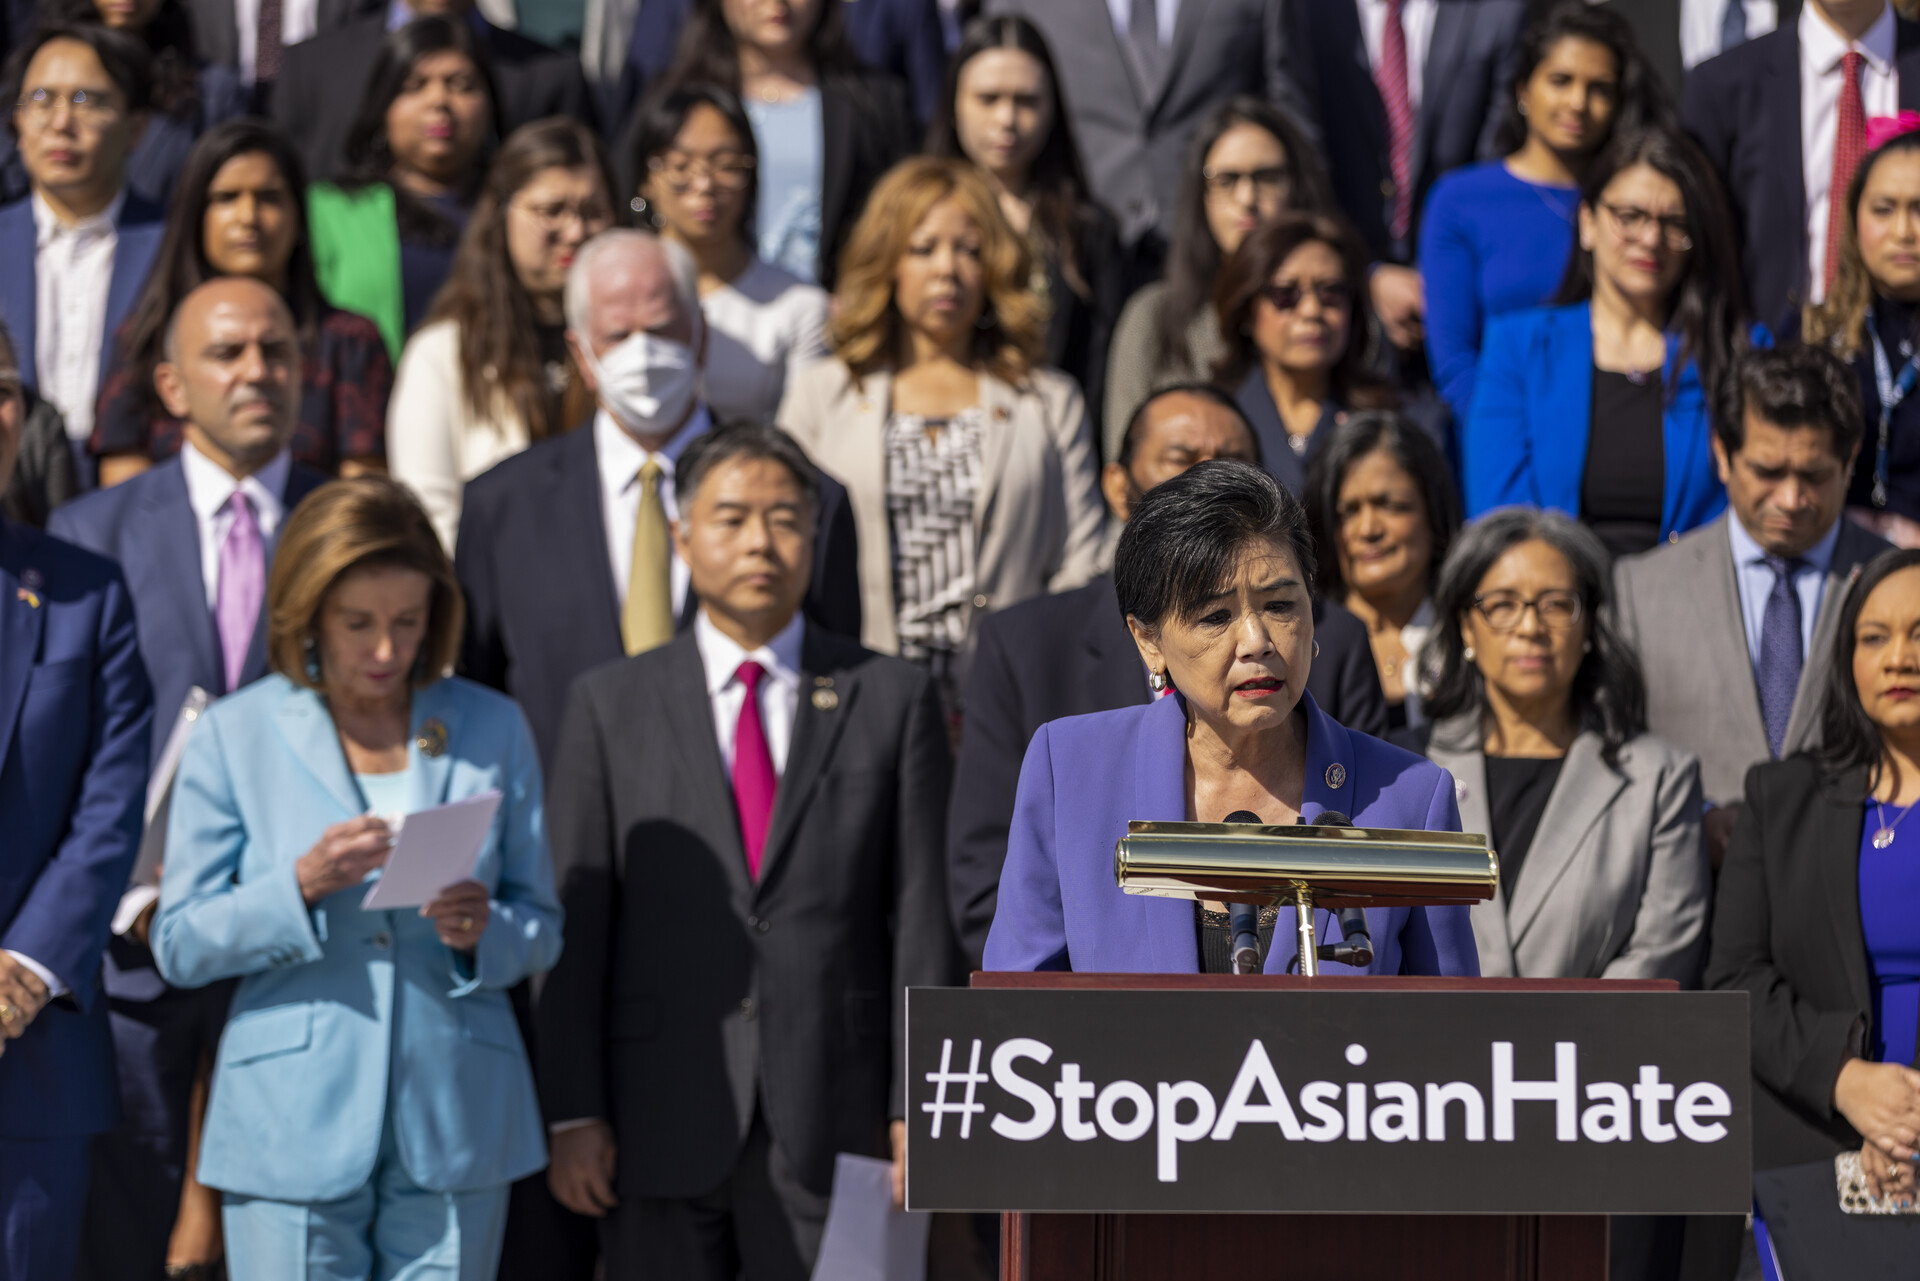 woman speaking at podium with 'stop asian hate' written on it as rows of faces of members of congress stand behind her